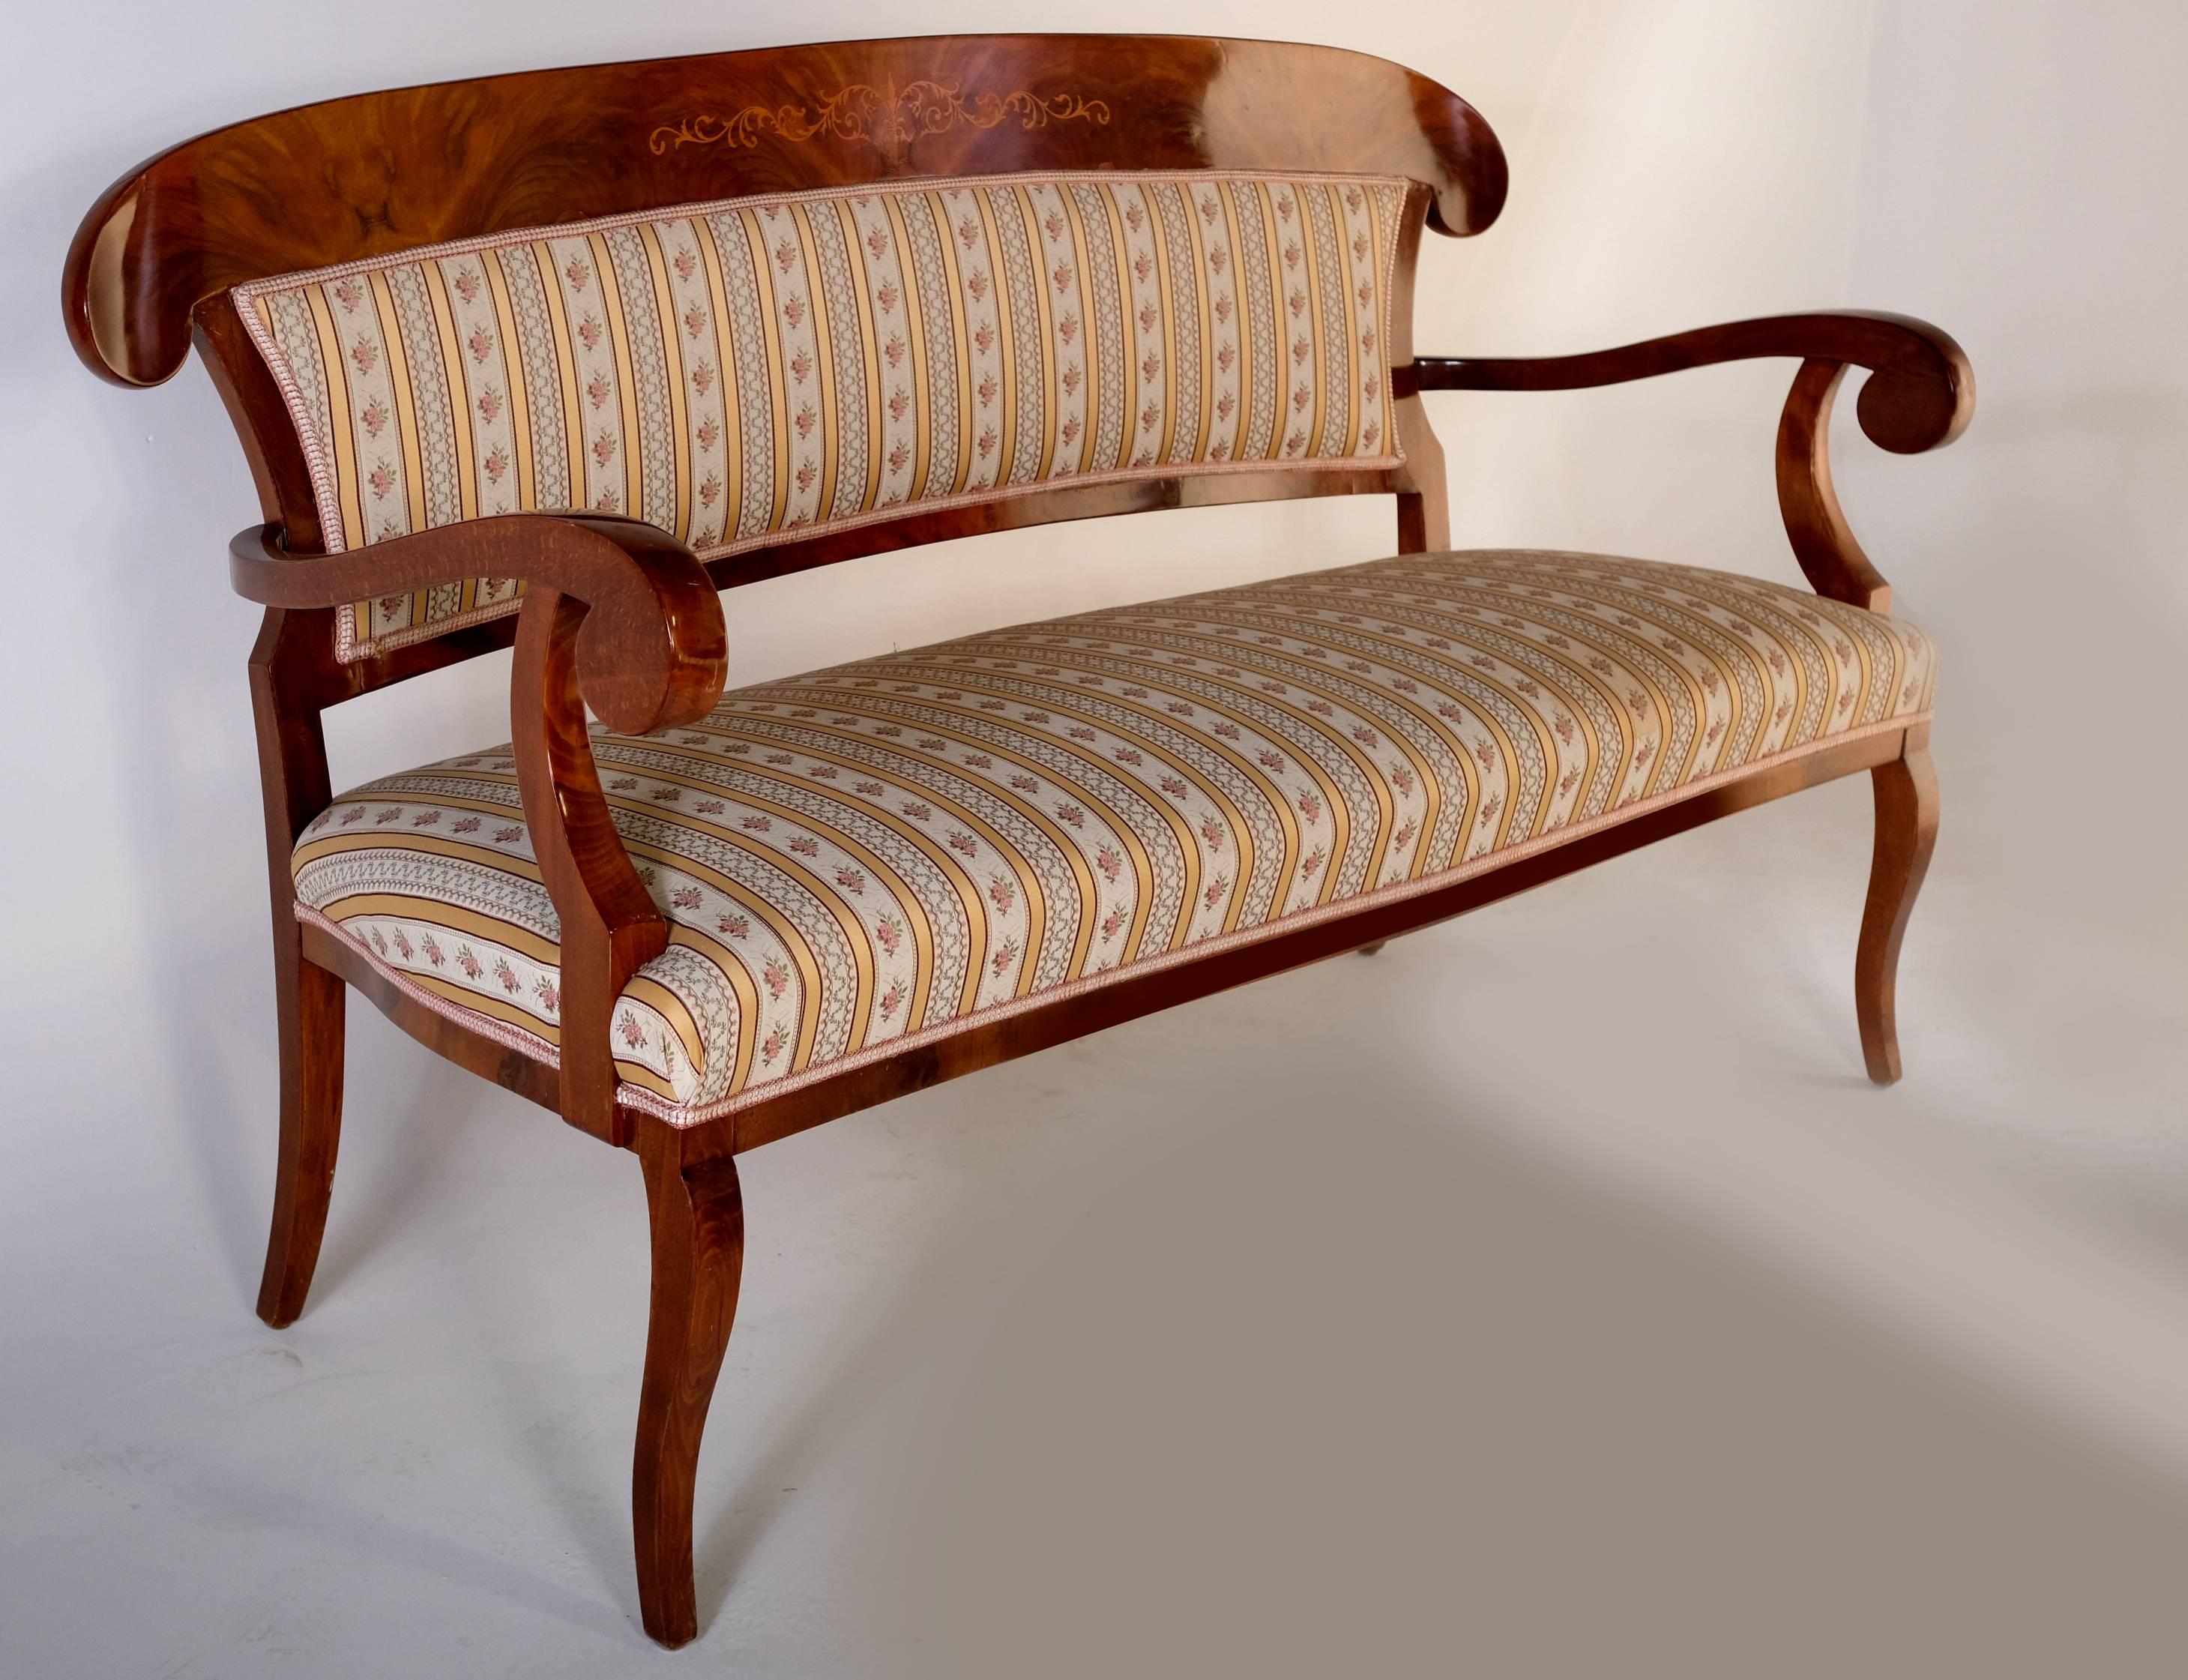 Elegant set consisting of a sofa and two armchairs in Biedermeier style. Refined carving on the back.